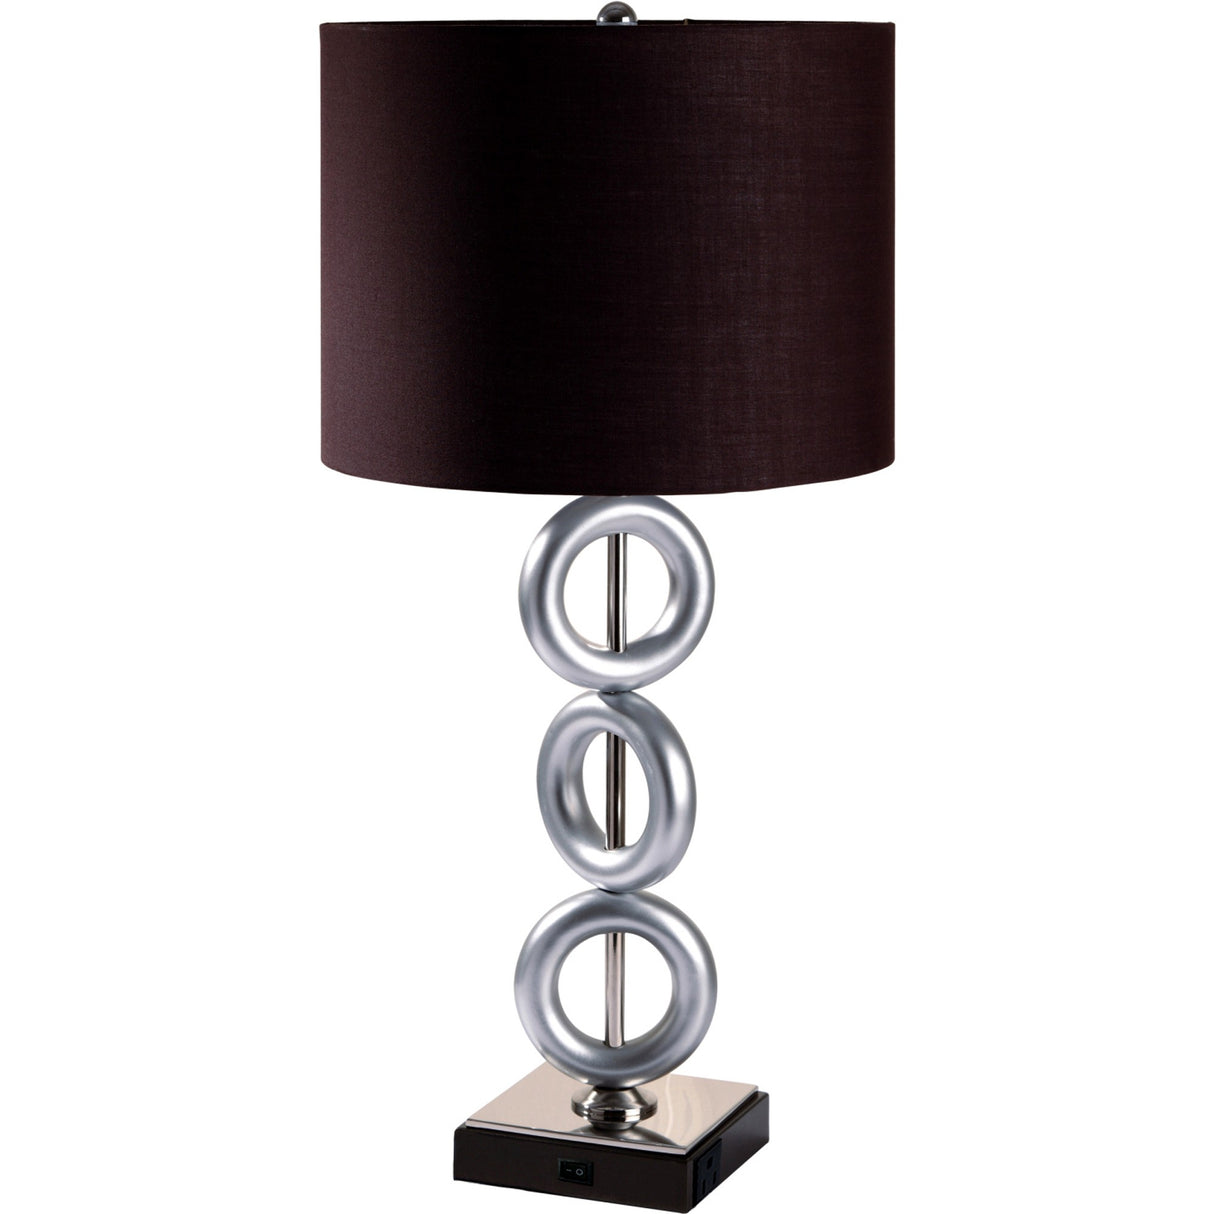 29" Silver Ceramic Geometric Table Lamp With Brown Classic Drum Shade